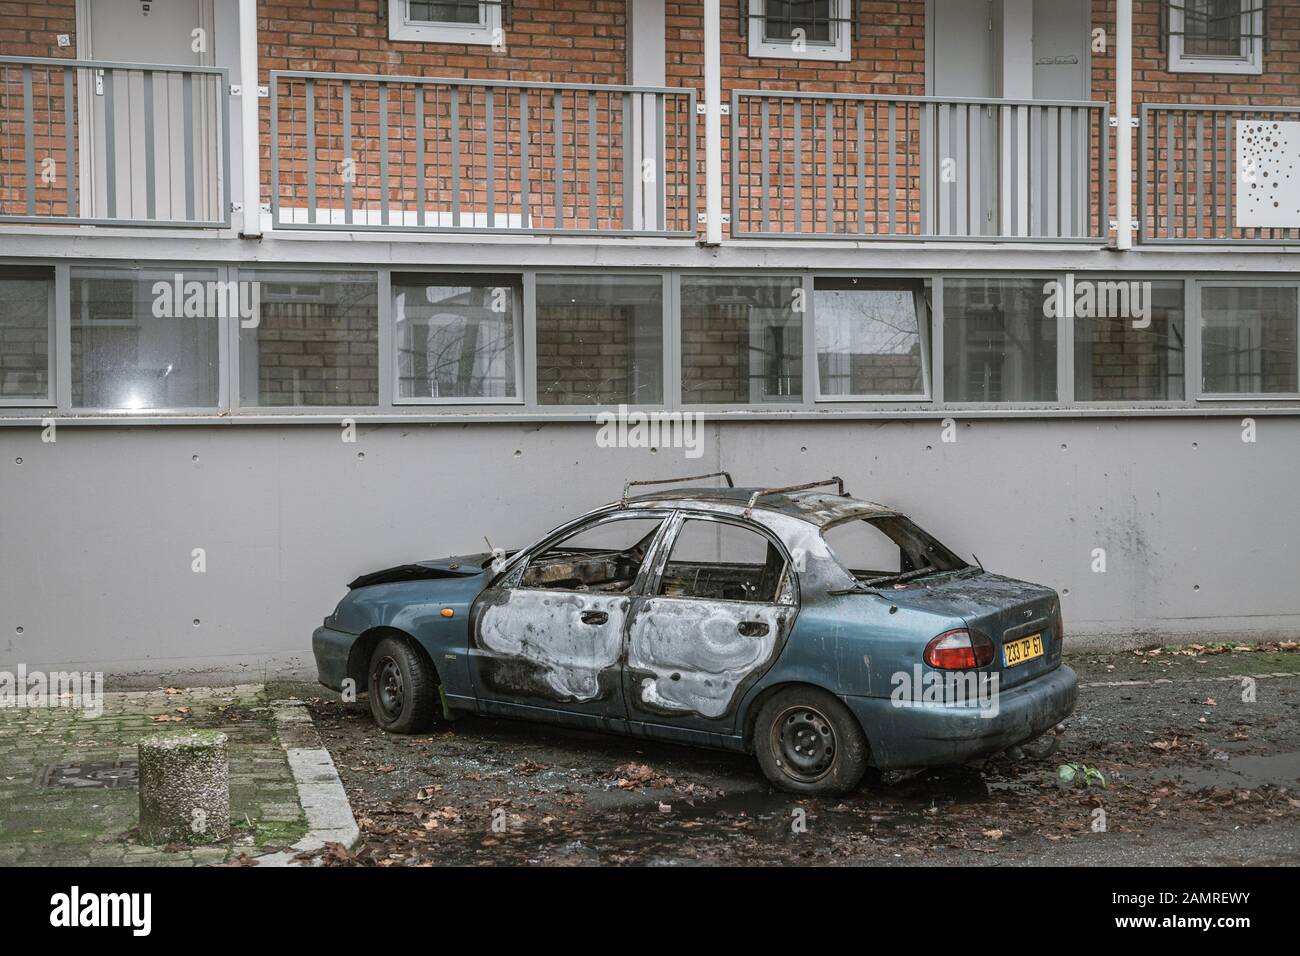 Strasbourg, France - Jan 1, 2020: Daewoo burnt car by Vandals in Strasbourg, France during the start of 2020 by setting countless vehicles on fire in front of HLM poor neighborhood Stock Photo